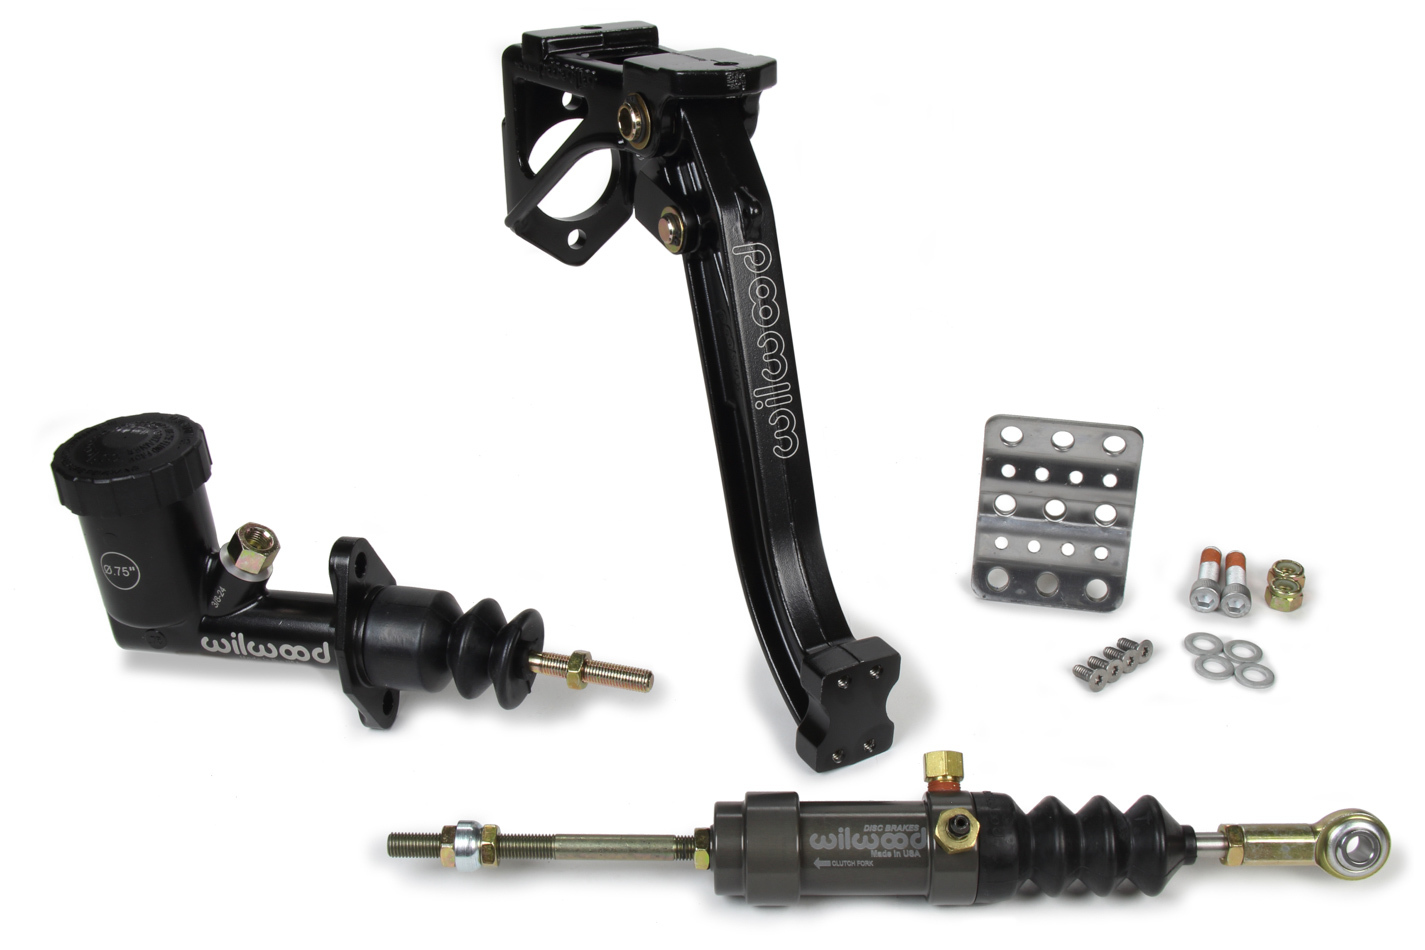 Wilwood 341-15169 Pedal Assembly, Clutch, 6 to 1 Ratio, 9.63 in Long, Forward Floor Mount, 3/4 in Master Cylinder Included, Aluminum, Black Paint, Kit